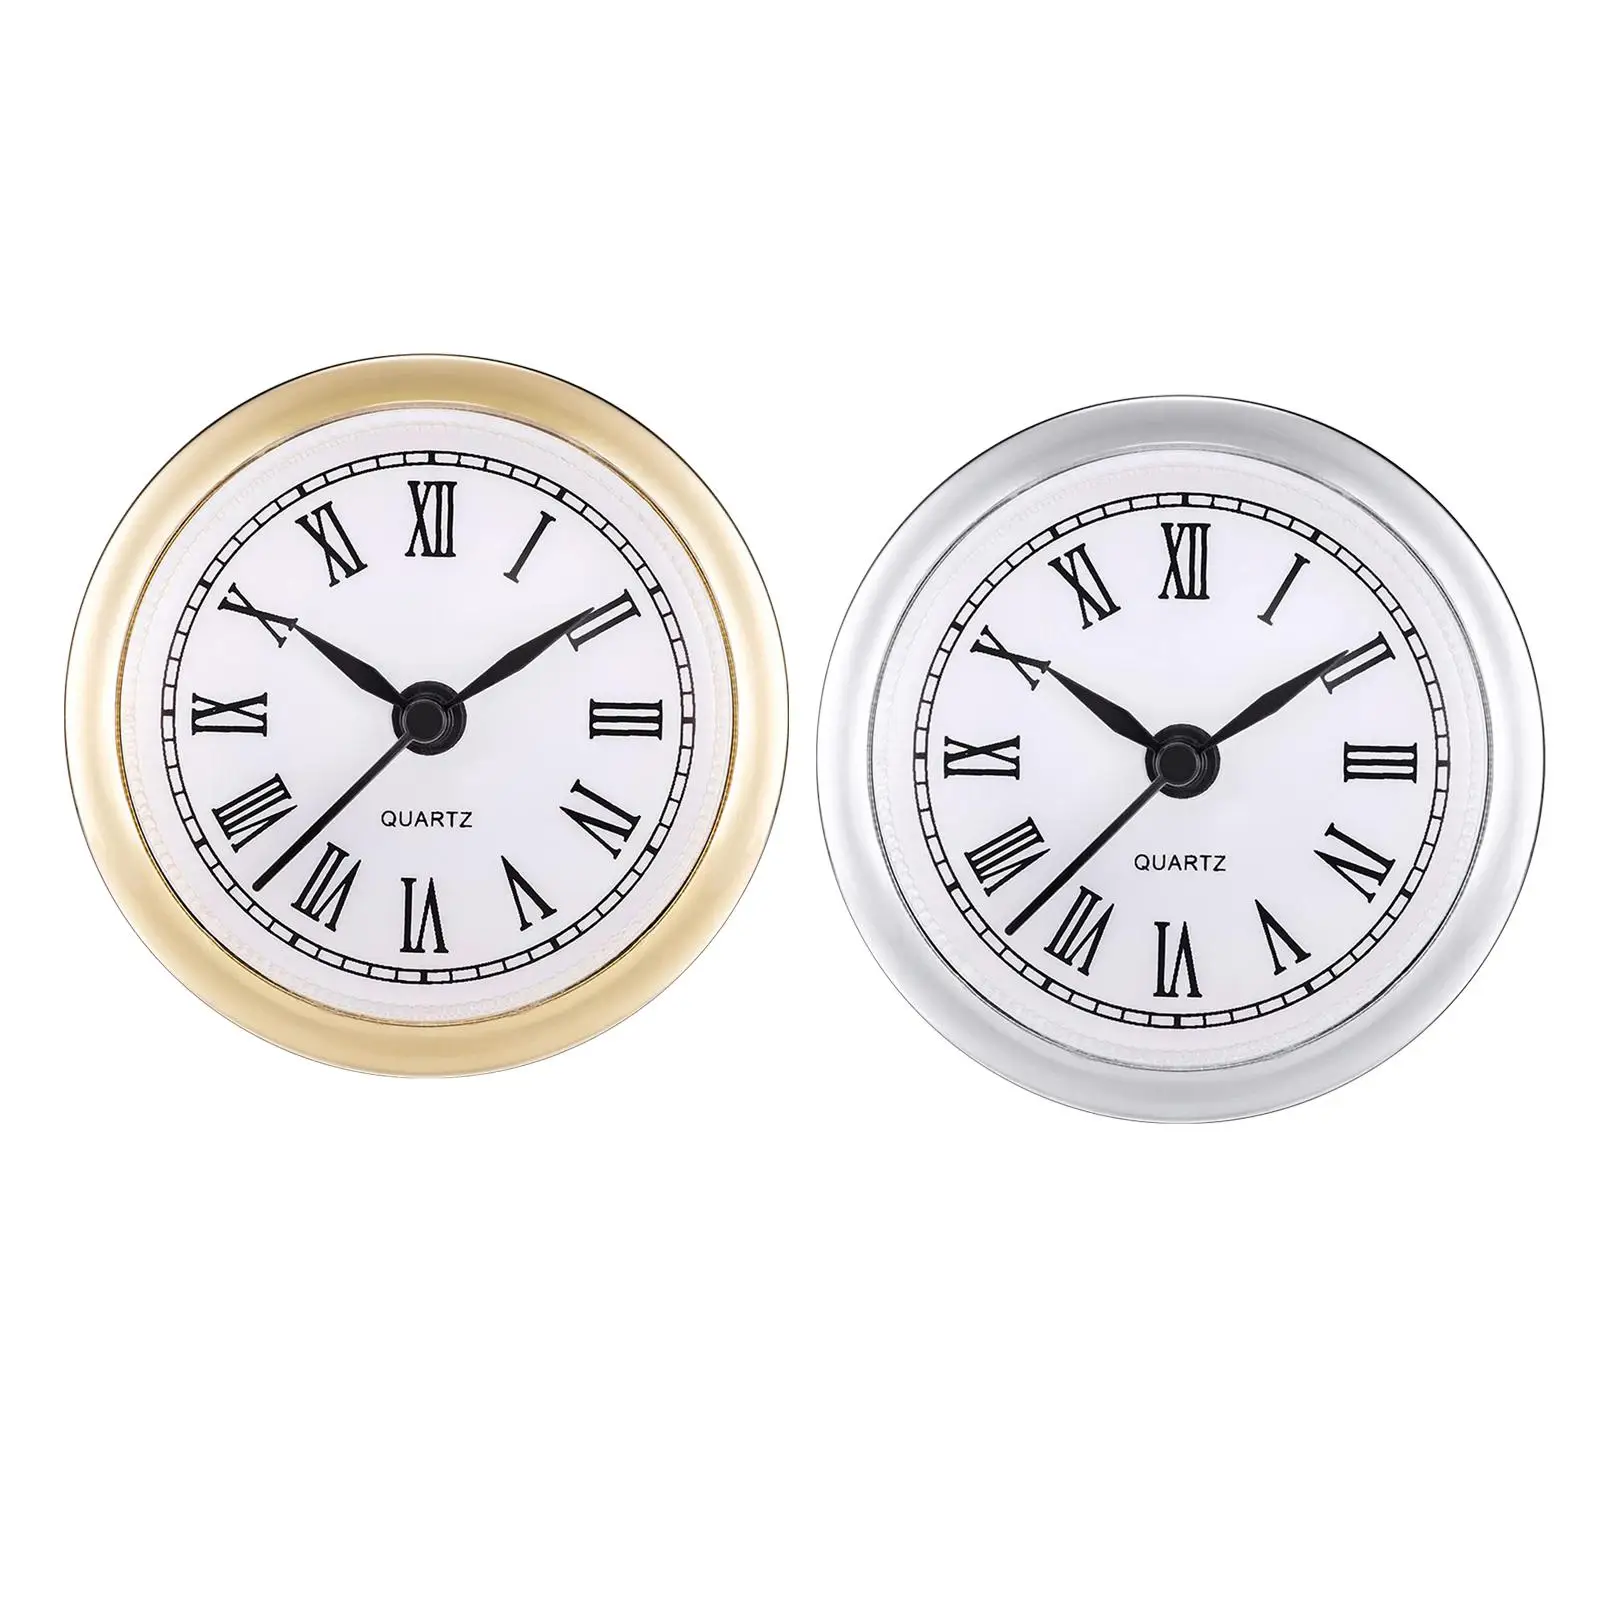 Round Quartz Clock Insert Wall Clock Movement Bezel Roman Numerals Battery Powered 2.4inch/61mm for Bedroom office and home